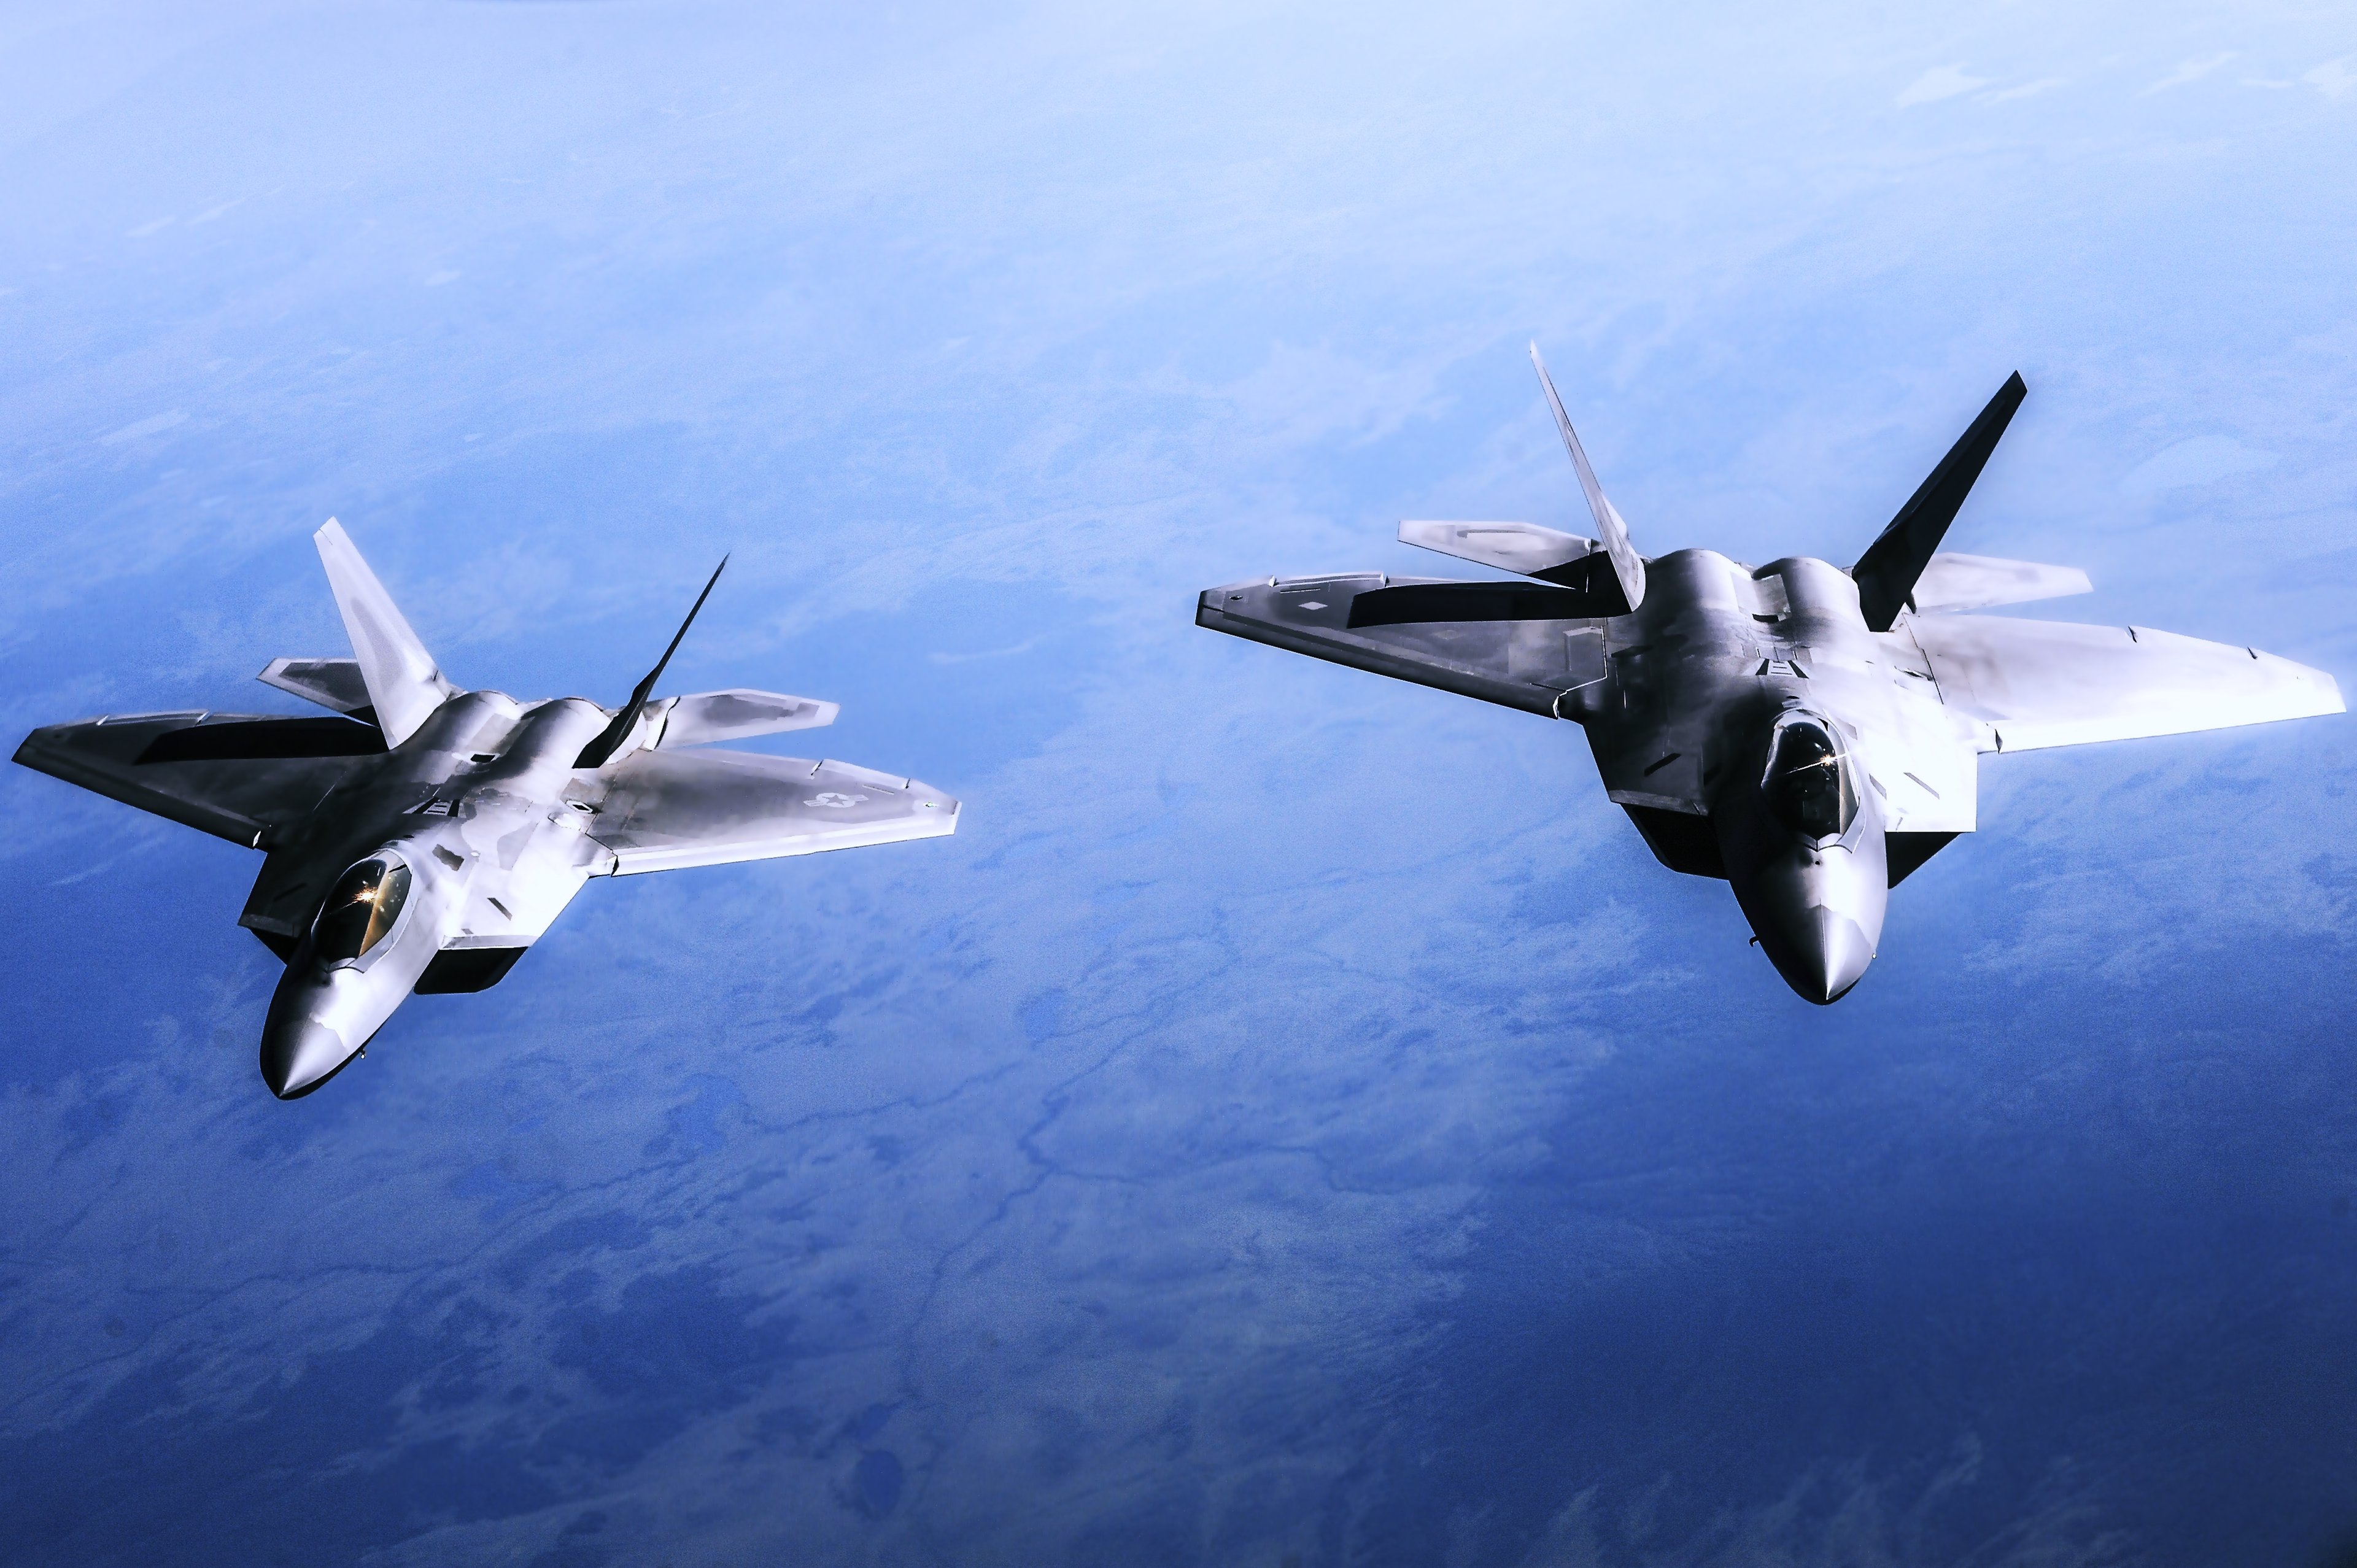 carrier, Aircrafts, Earth, Fighters, Carrier, Nature, Planes, Sky, Wars, Review, Nebo, Samolety, F 22, Raptor Wallpaper